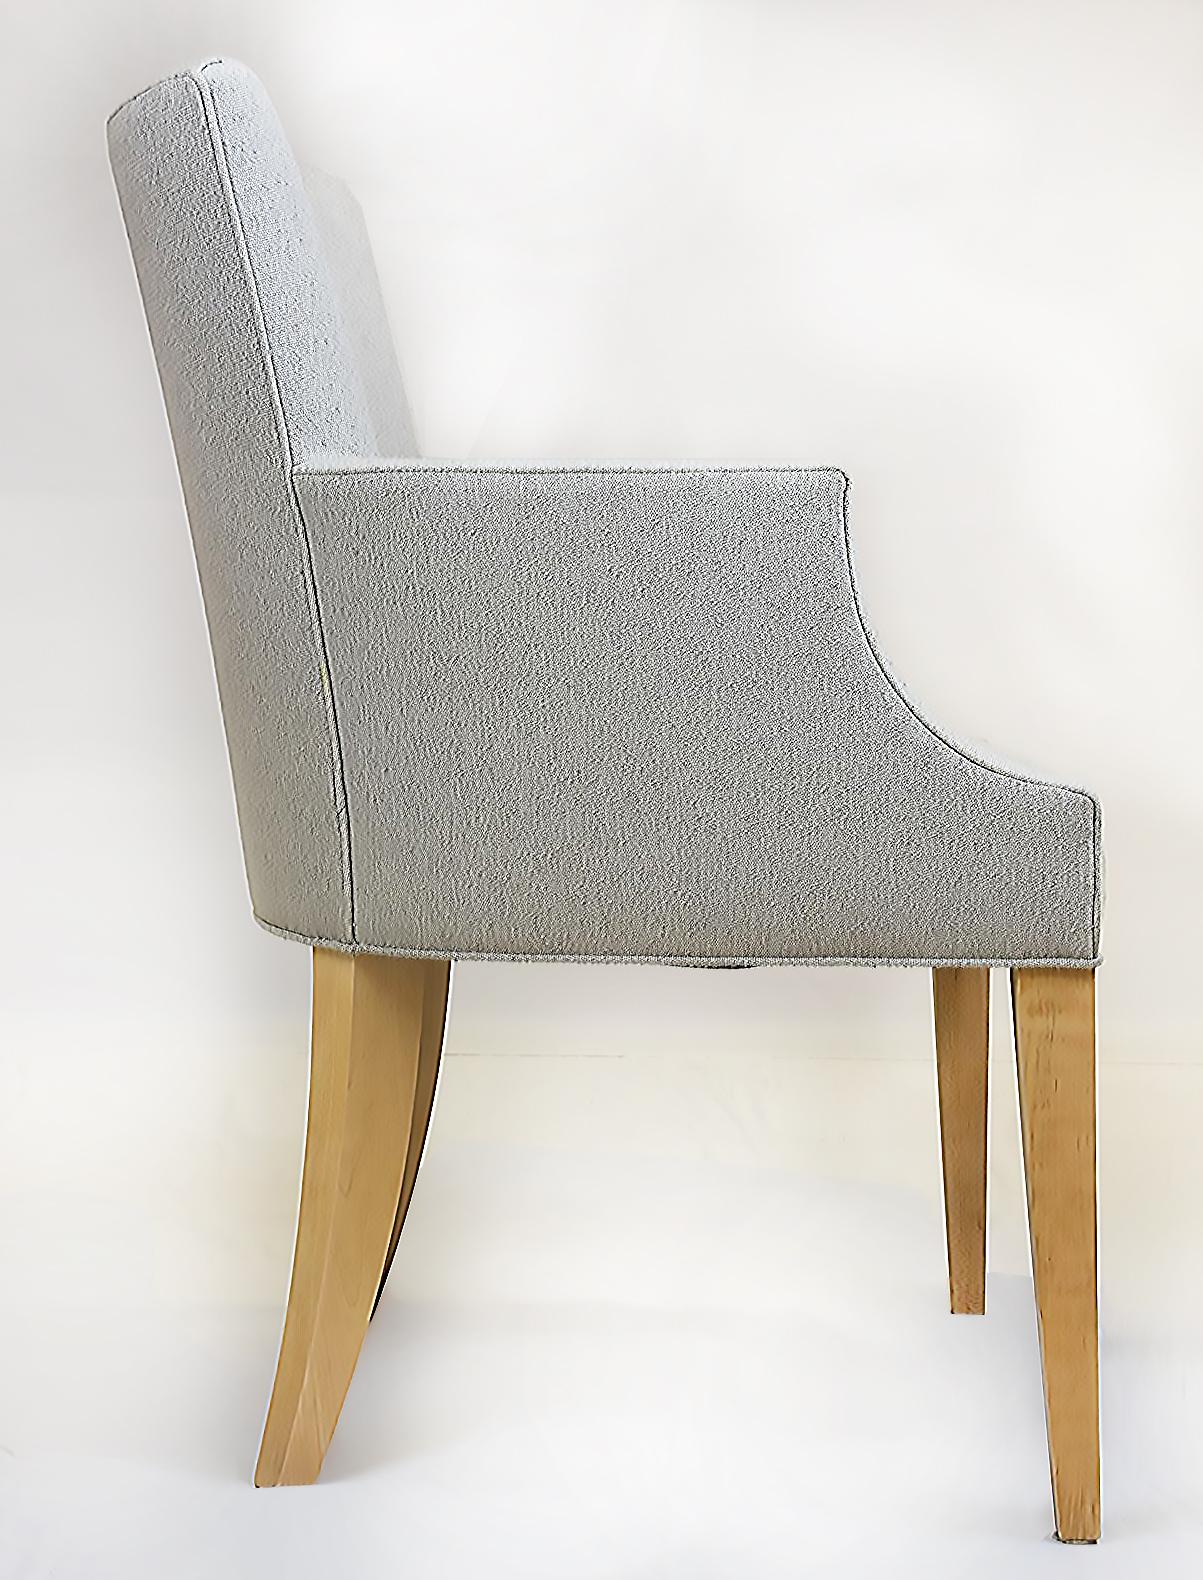 Contemporary Le Jeune Upholstery Kilani Dining Armchair Showroom Model For Sale